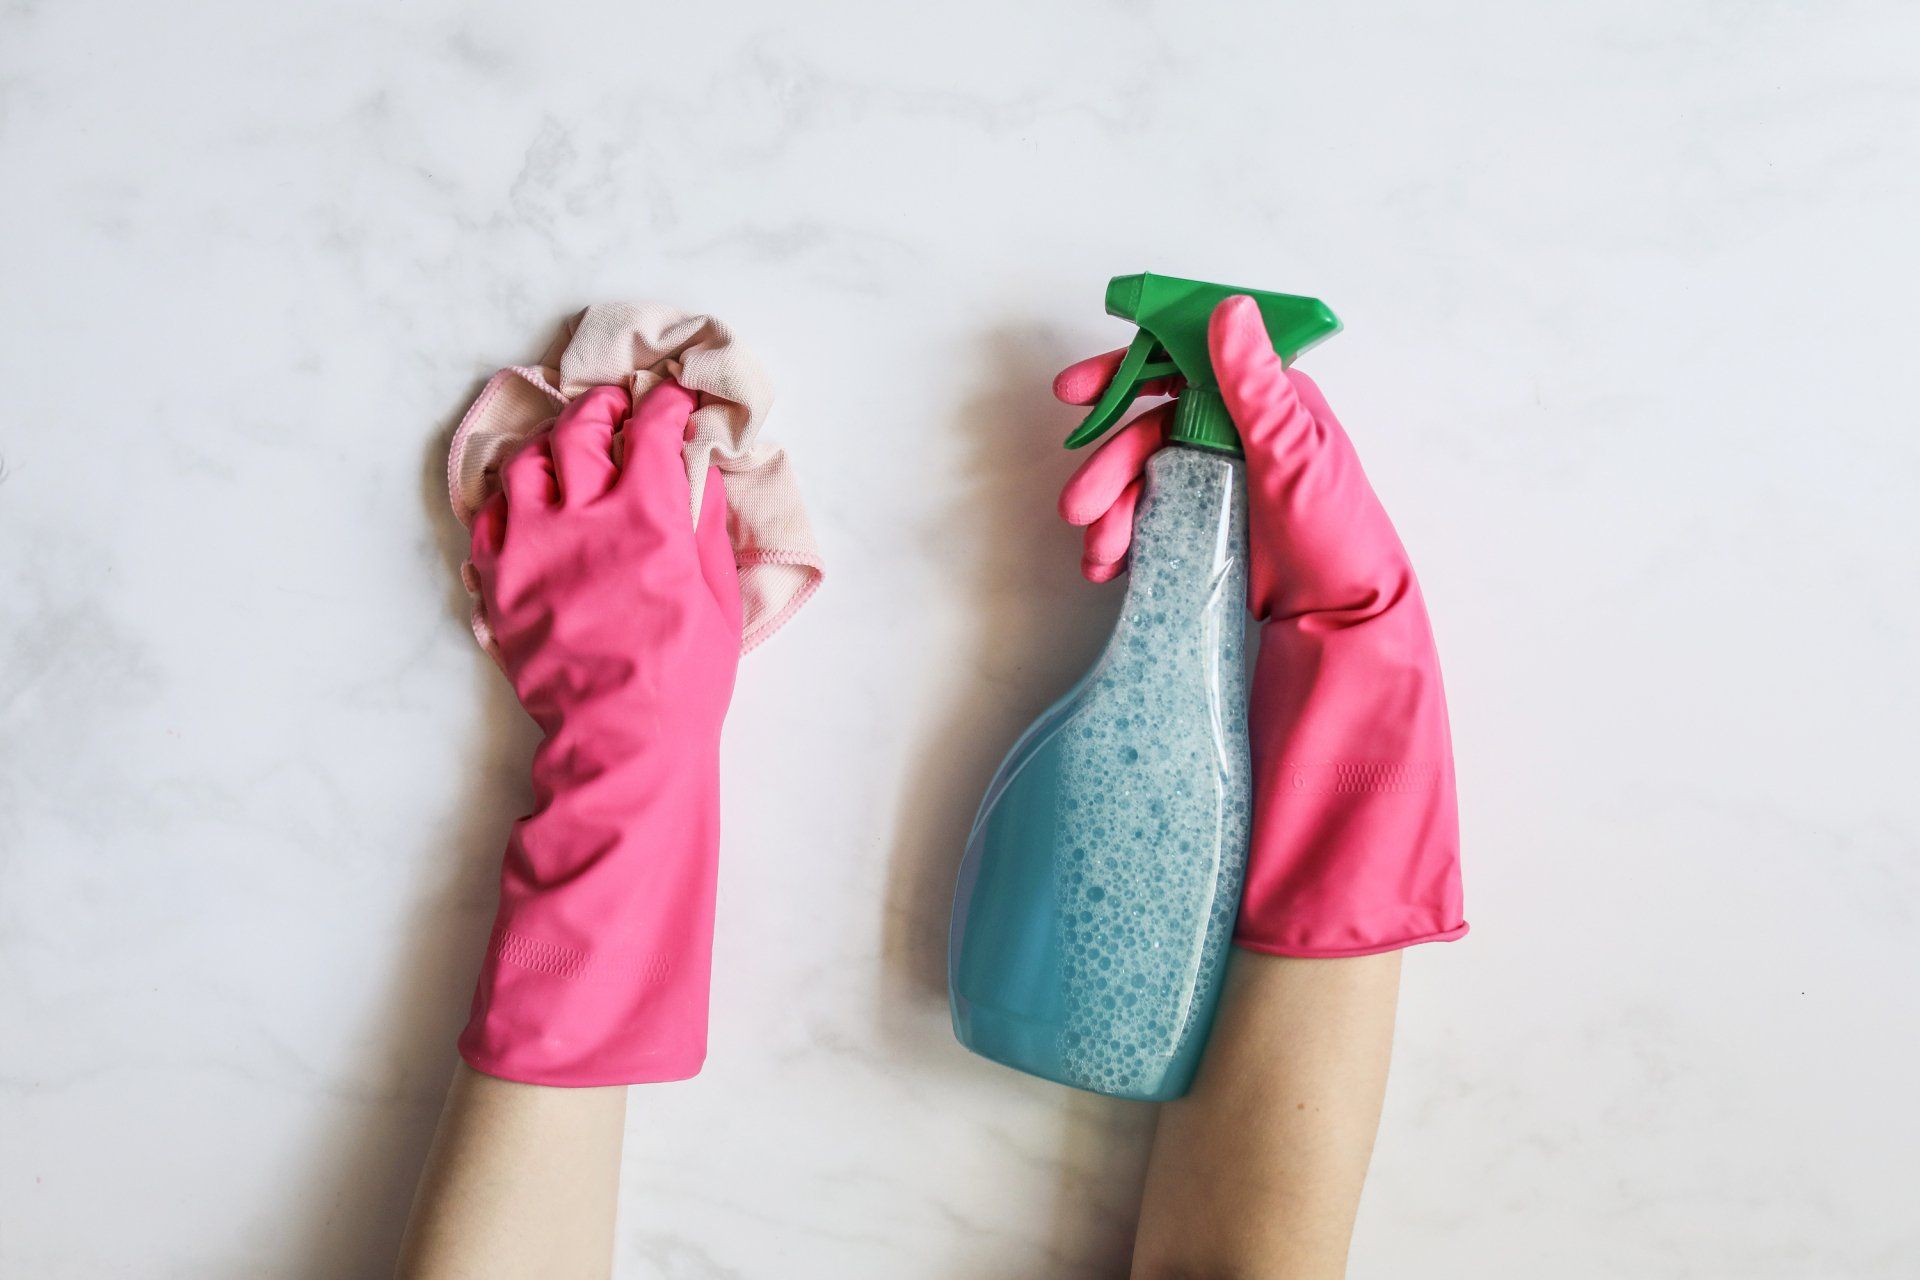 a person wearing pink gloves is holding a spray bottle and a cloth .